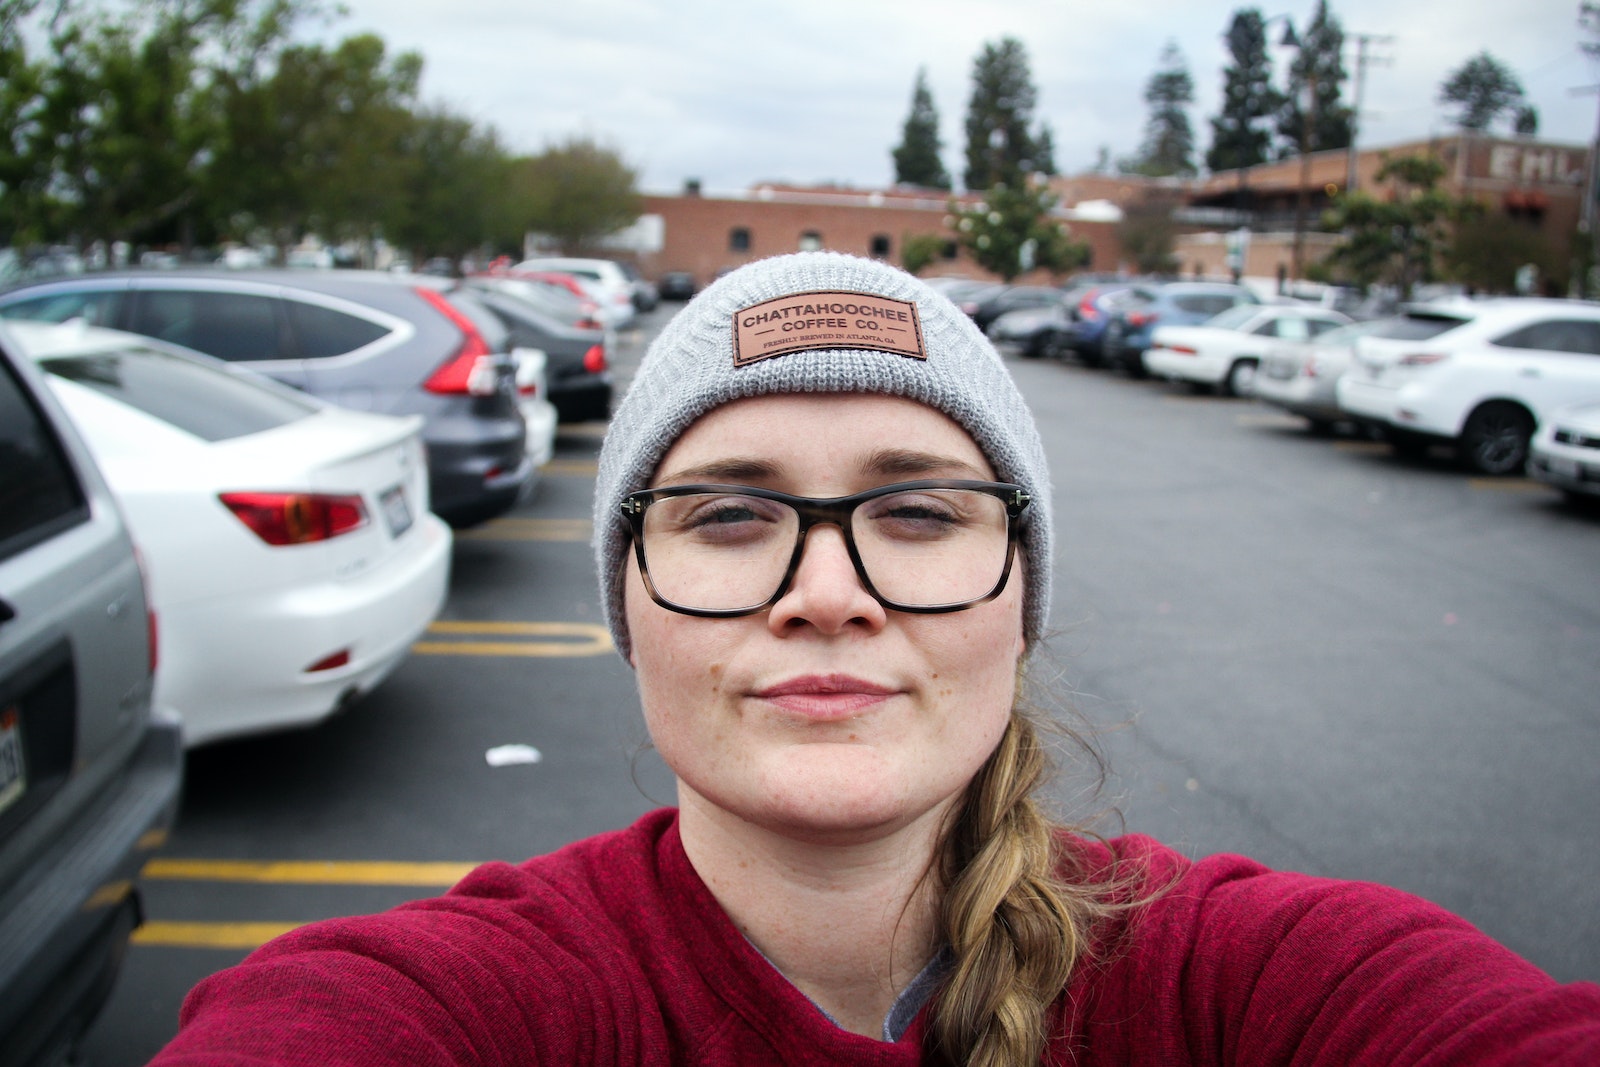 Woman Taking Photo Of Herself Near Parked Vehicles